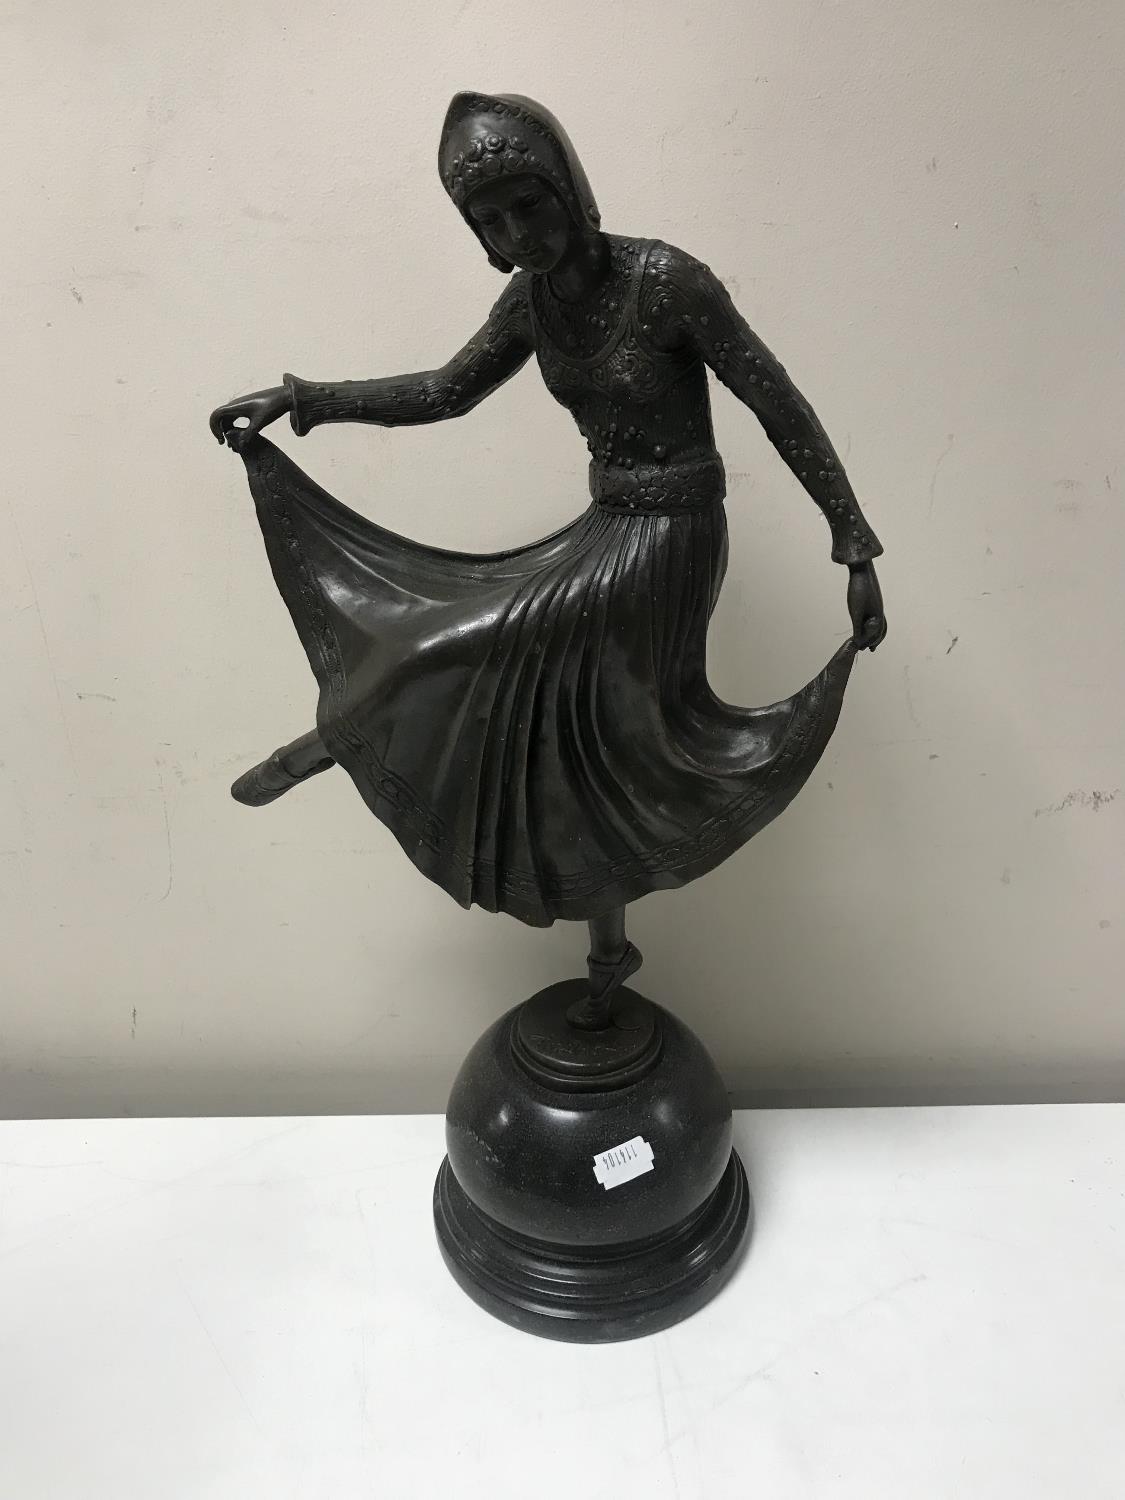 A bronze Art Deco style figure of a lady dancing,